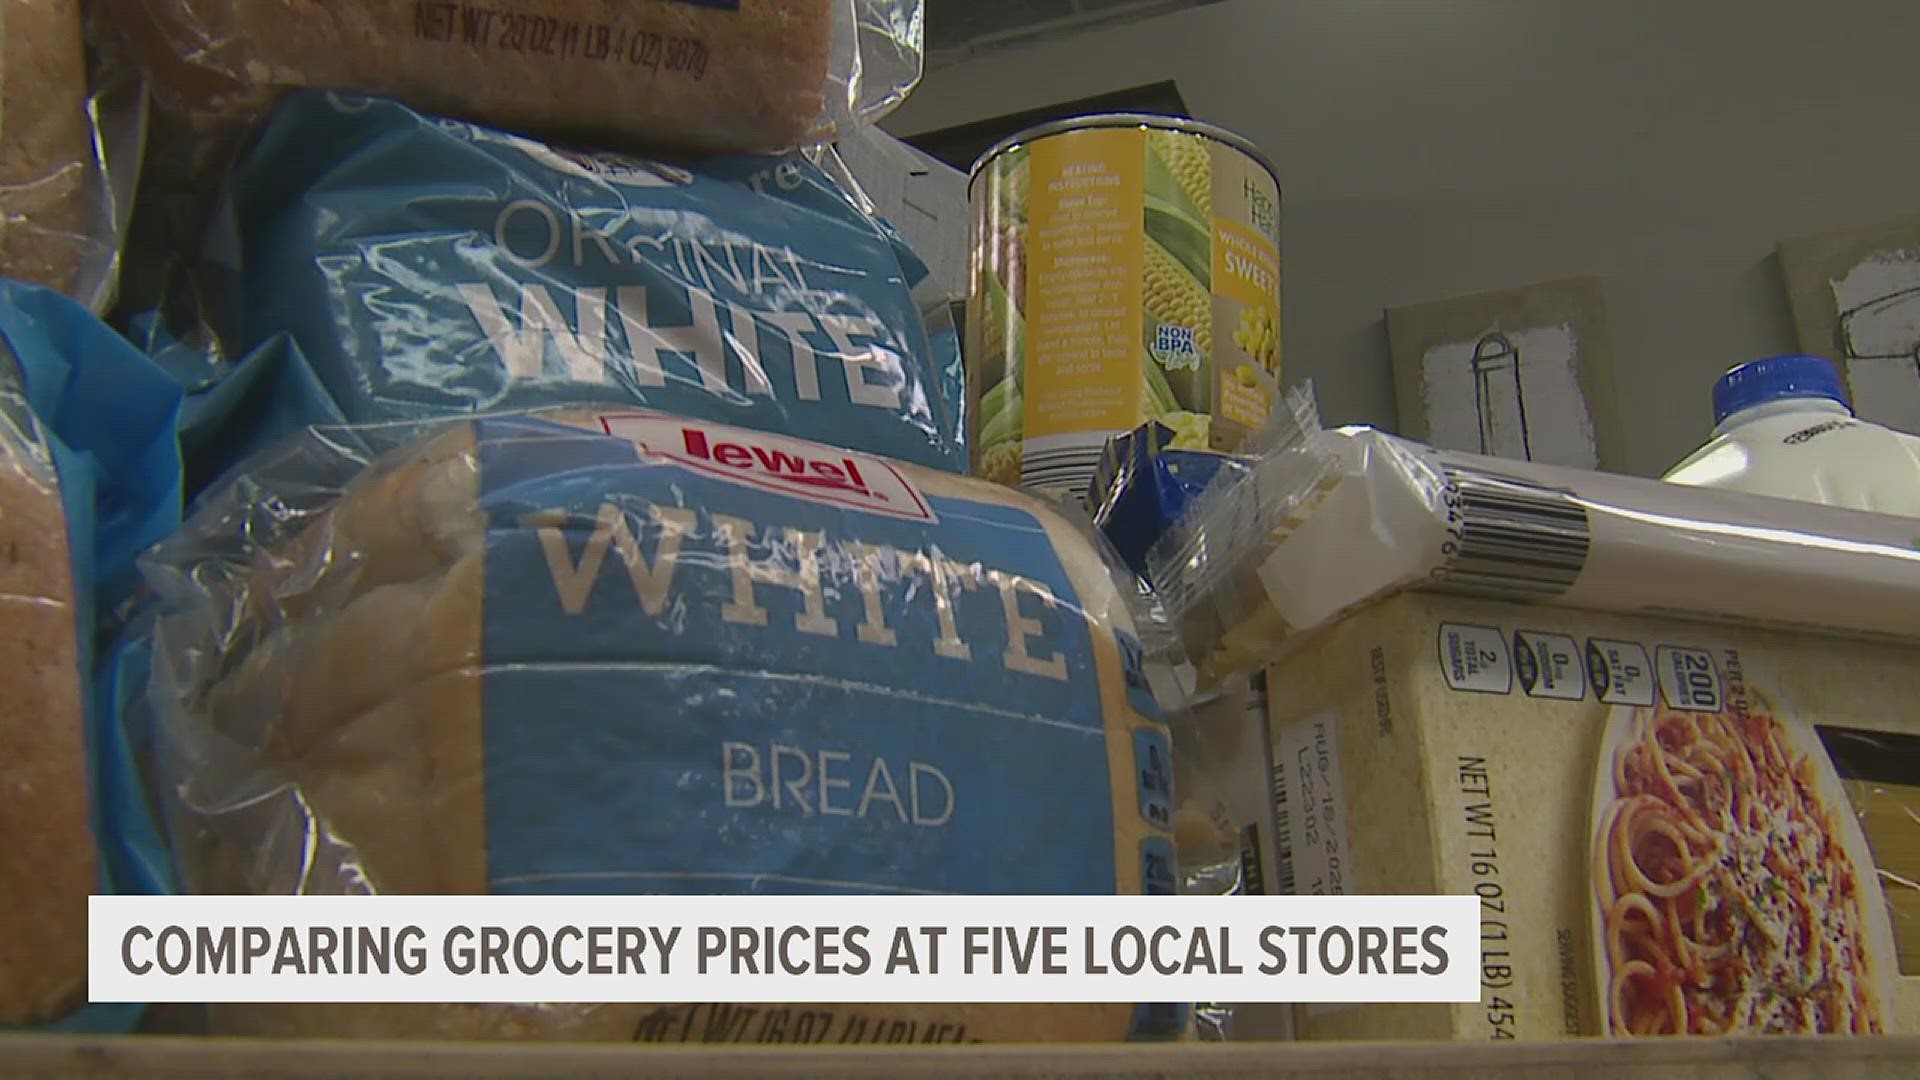 We went to Aldi, Walmart, Hy-Vee, Jewel-Osco and Fareway to compare prices on eight identical items.